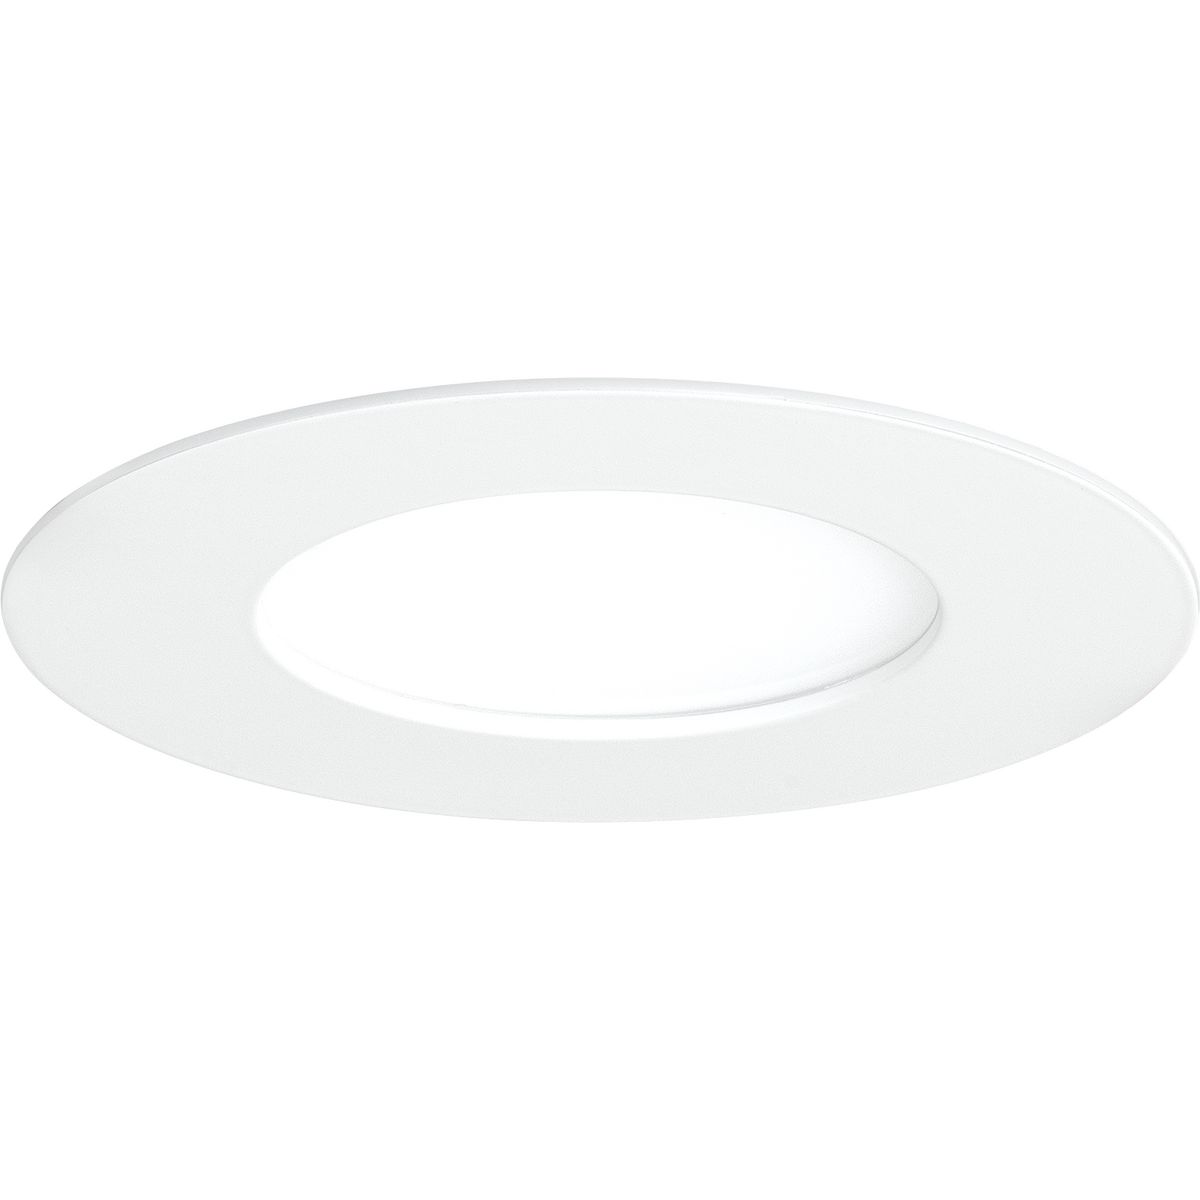 5 in Slim, low profile recessed downlight combines innovative technology, aesthetics, functionality and affordability. No housing or J-Box required for installation and wet location listed provides the ultimate flexibility. The low profile downlight is ideal for many residential, multi-family, commercial and hospitality applications. Featuring a detachable driver box, which can be mounted remotely for shallow ceiling installations. Energy efficient design provides up to a 75 percent energy savings and up to 54,000 hours of LED life. Flicker free dimming down to 10percent with many Forward Phase Triac and Electronic Low Voltage ELV dimmers. White finish.